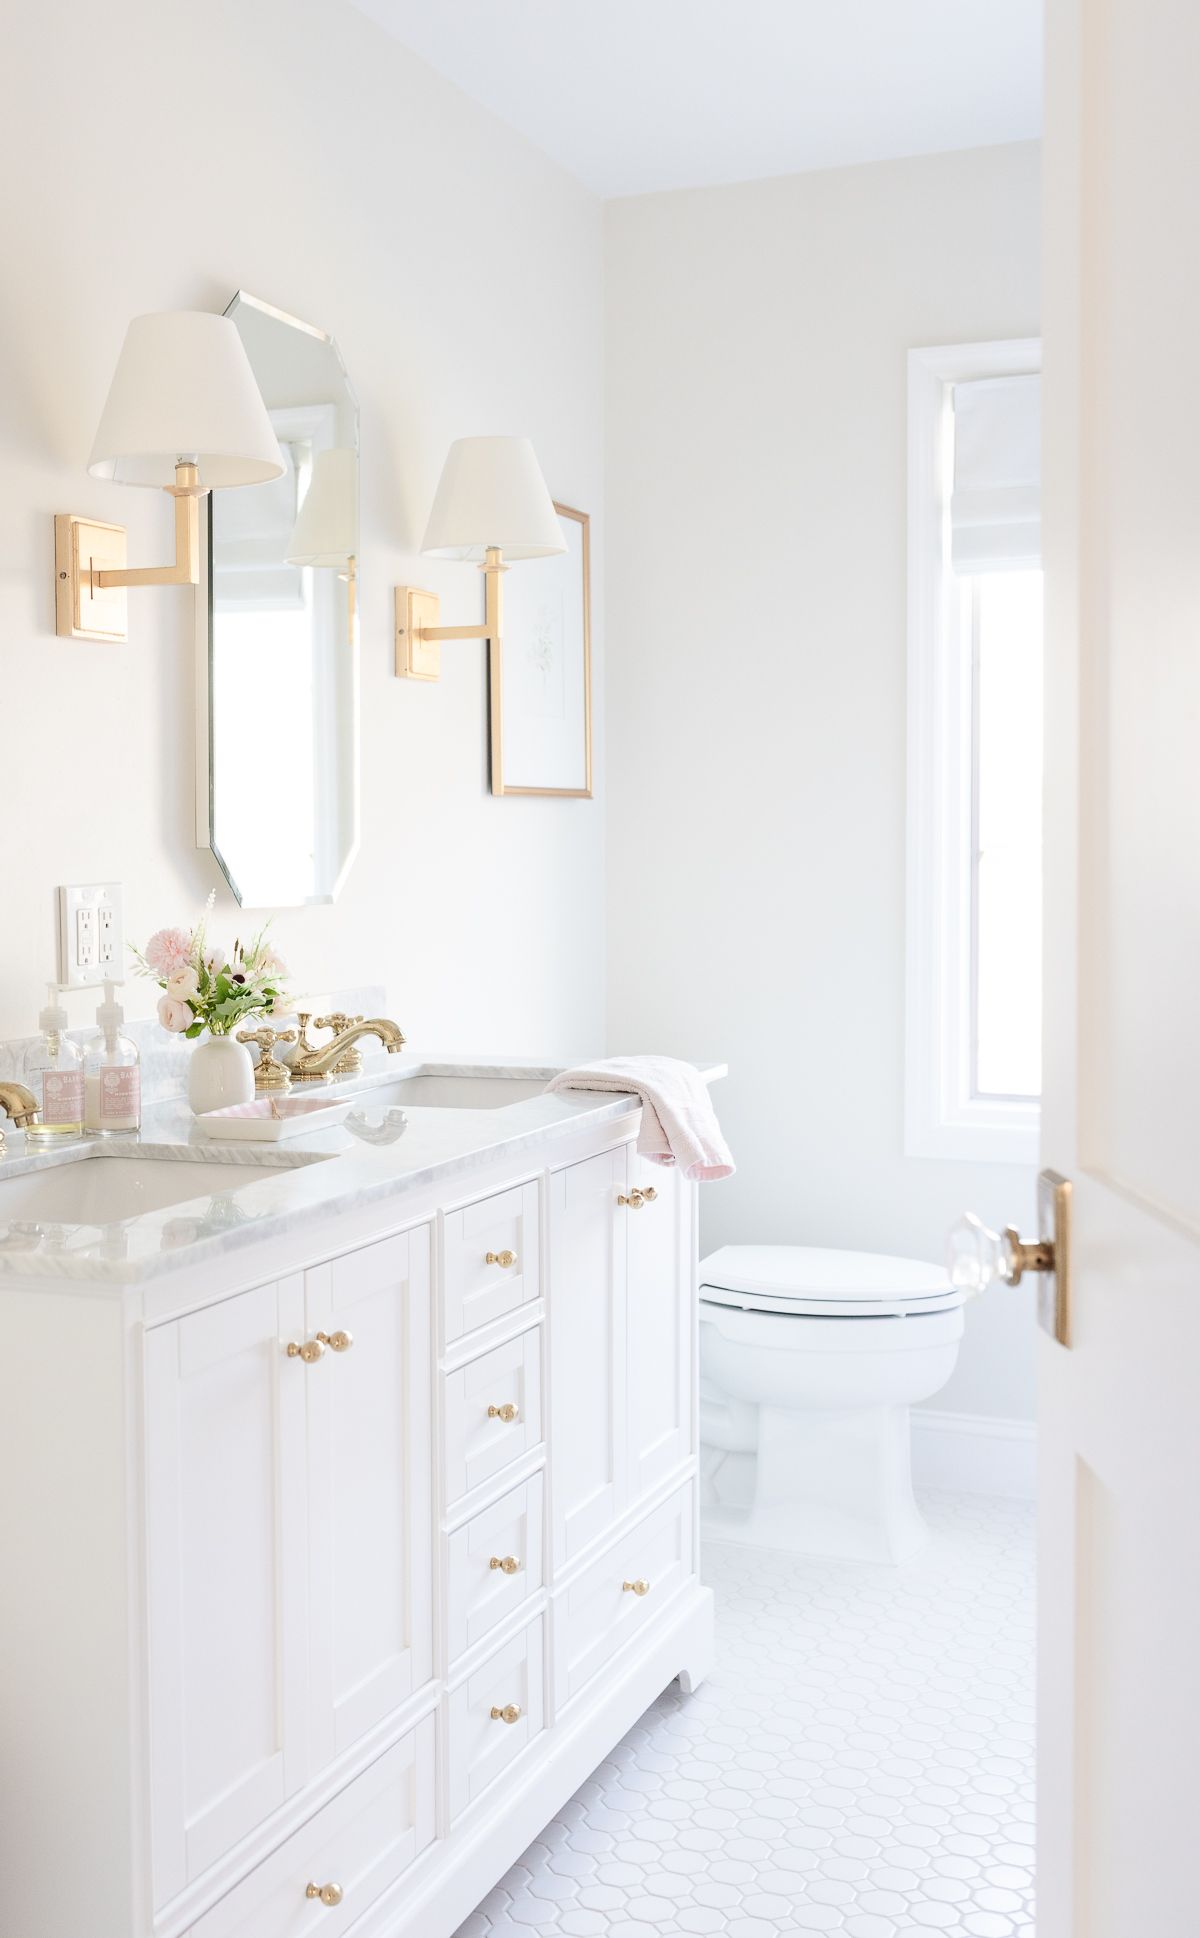 A white and bright bathroom with a window and two sconces